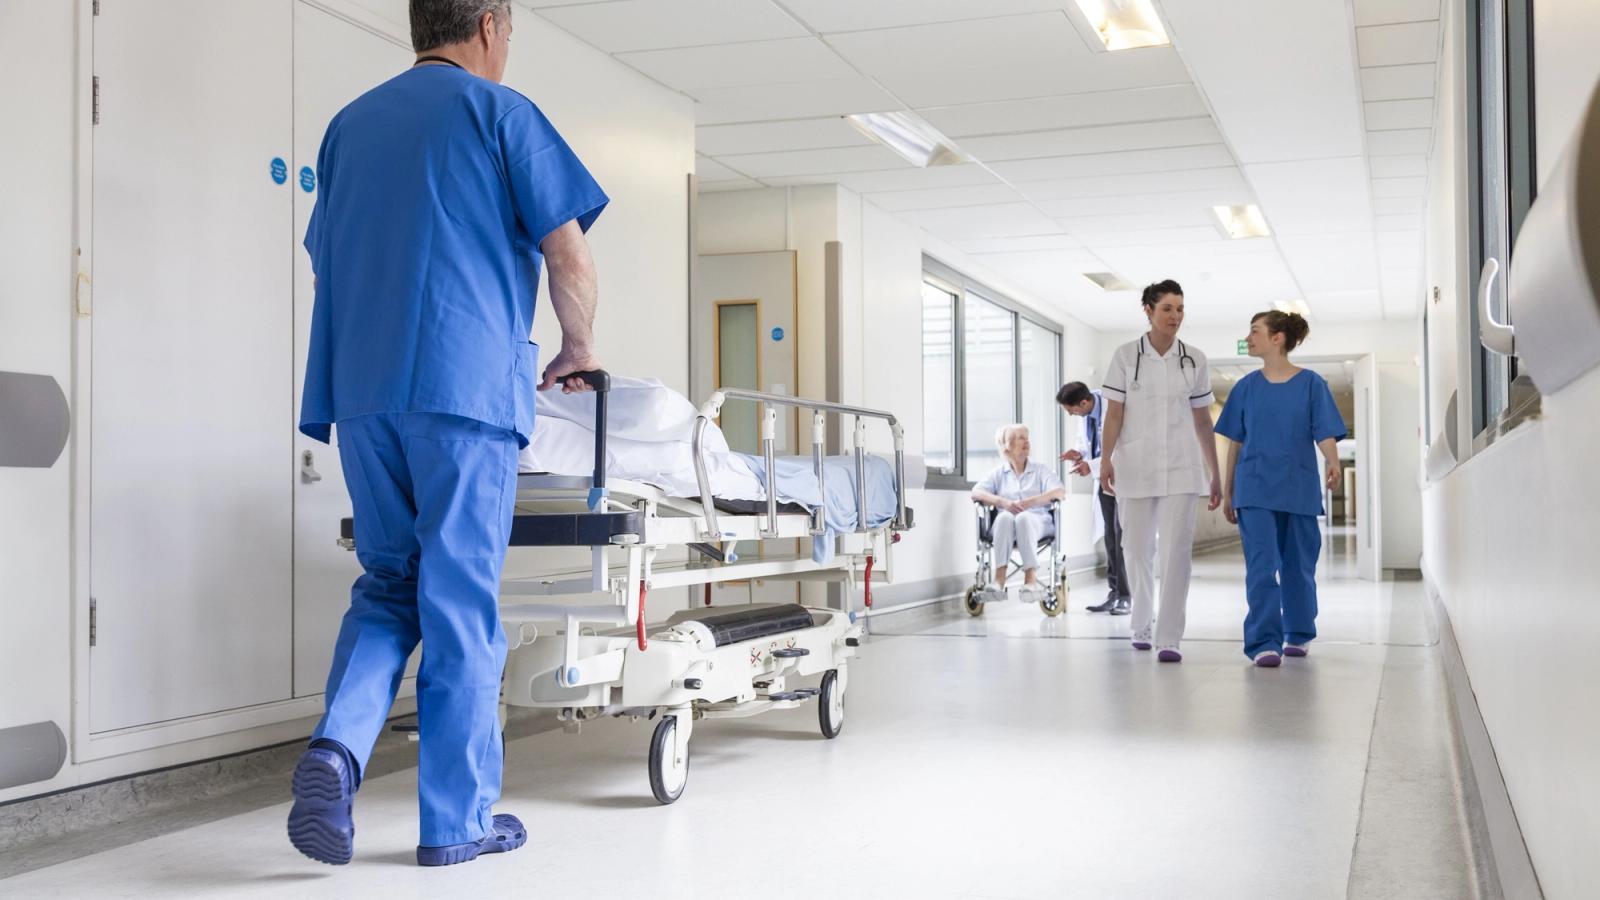 3 Ways to Engage the Next Generation of RNs